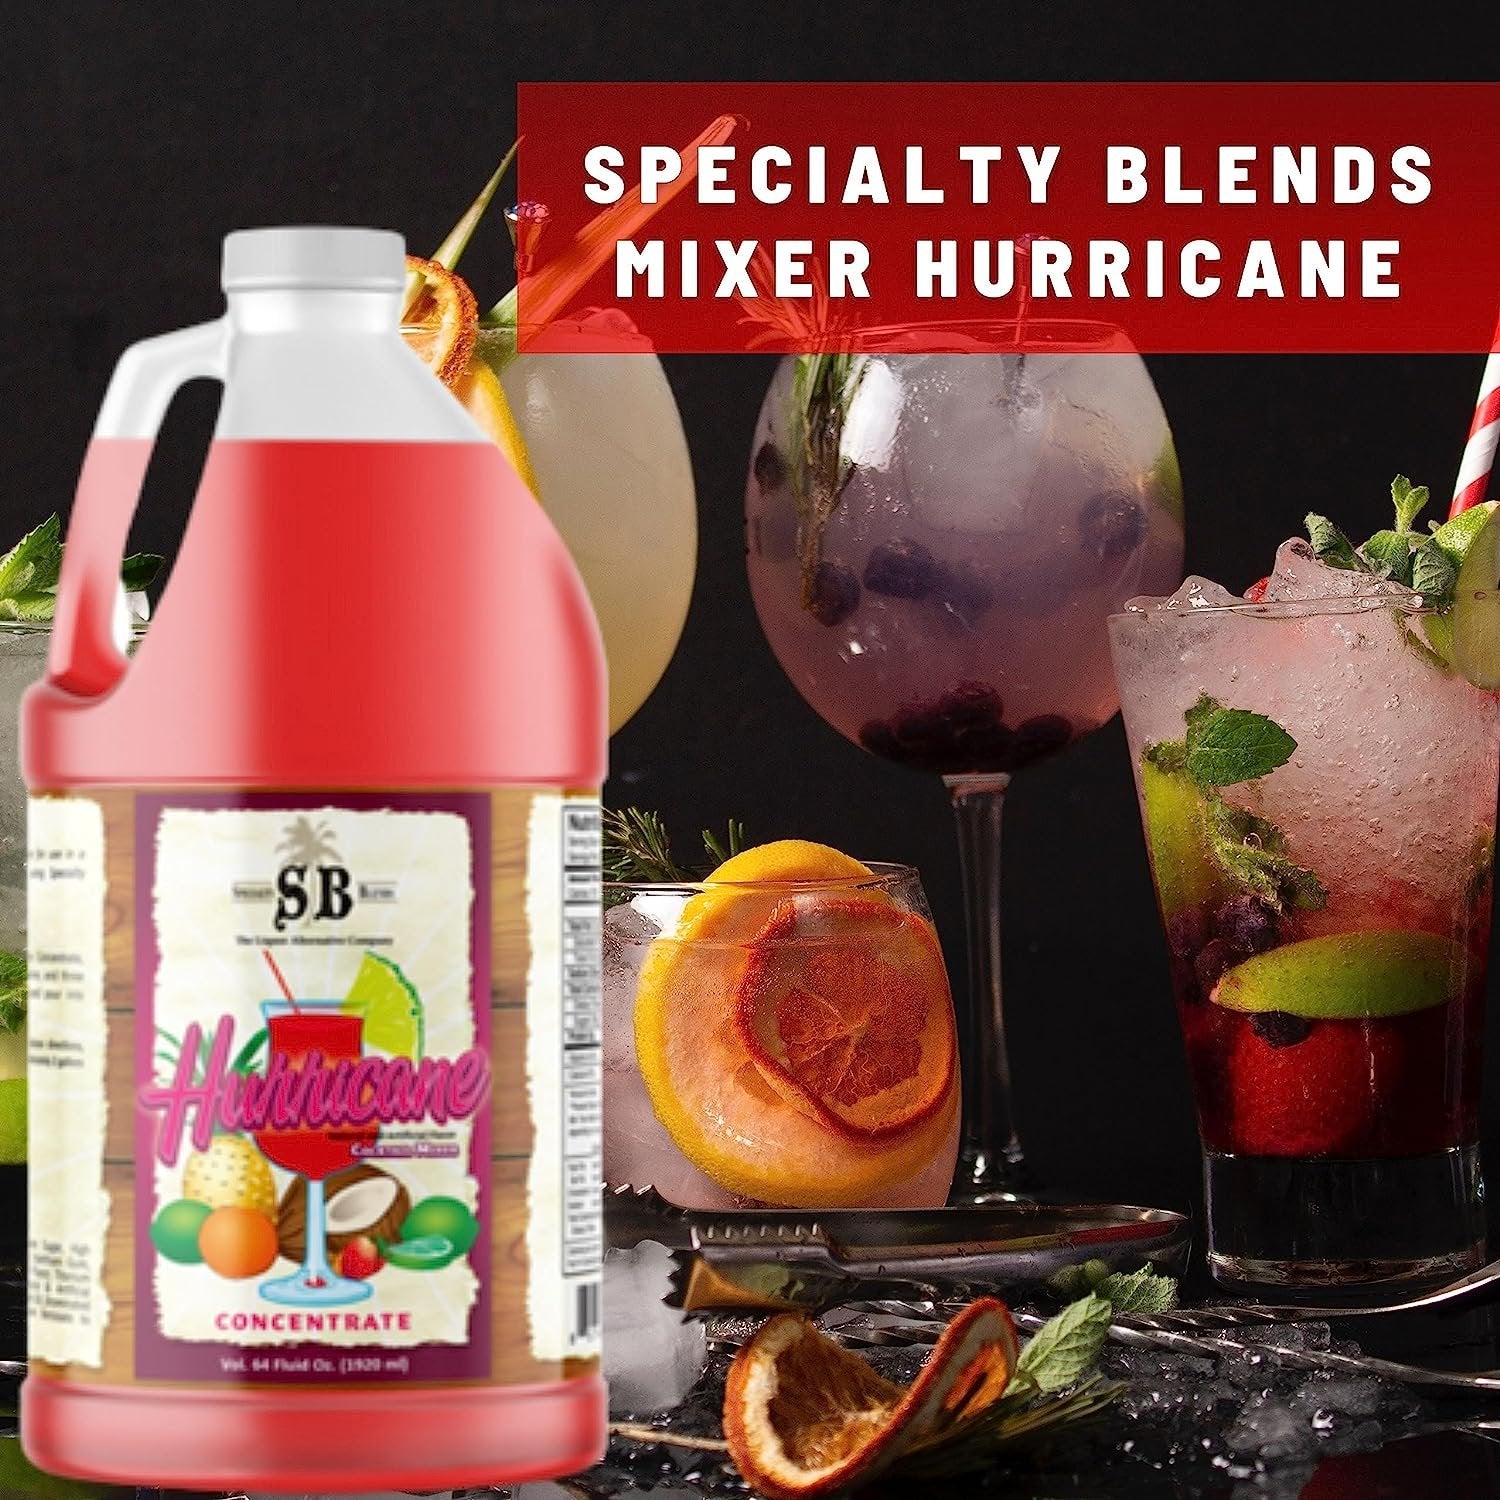 Specialty Blends Hurricane Flavored Syrup Cocktail Mixer Concentrate, Made with Hurricane Flavor Syrups For Drinks, 1/2 Gallon (Pack of 1) - with Bonus Worldwide Nutrition Multi Purpose Key Chain